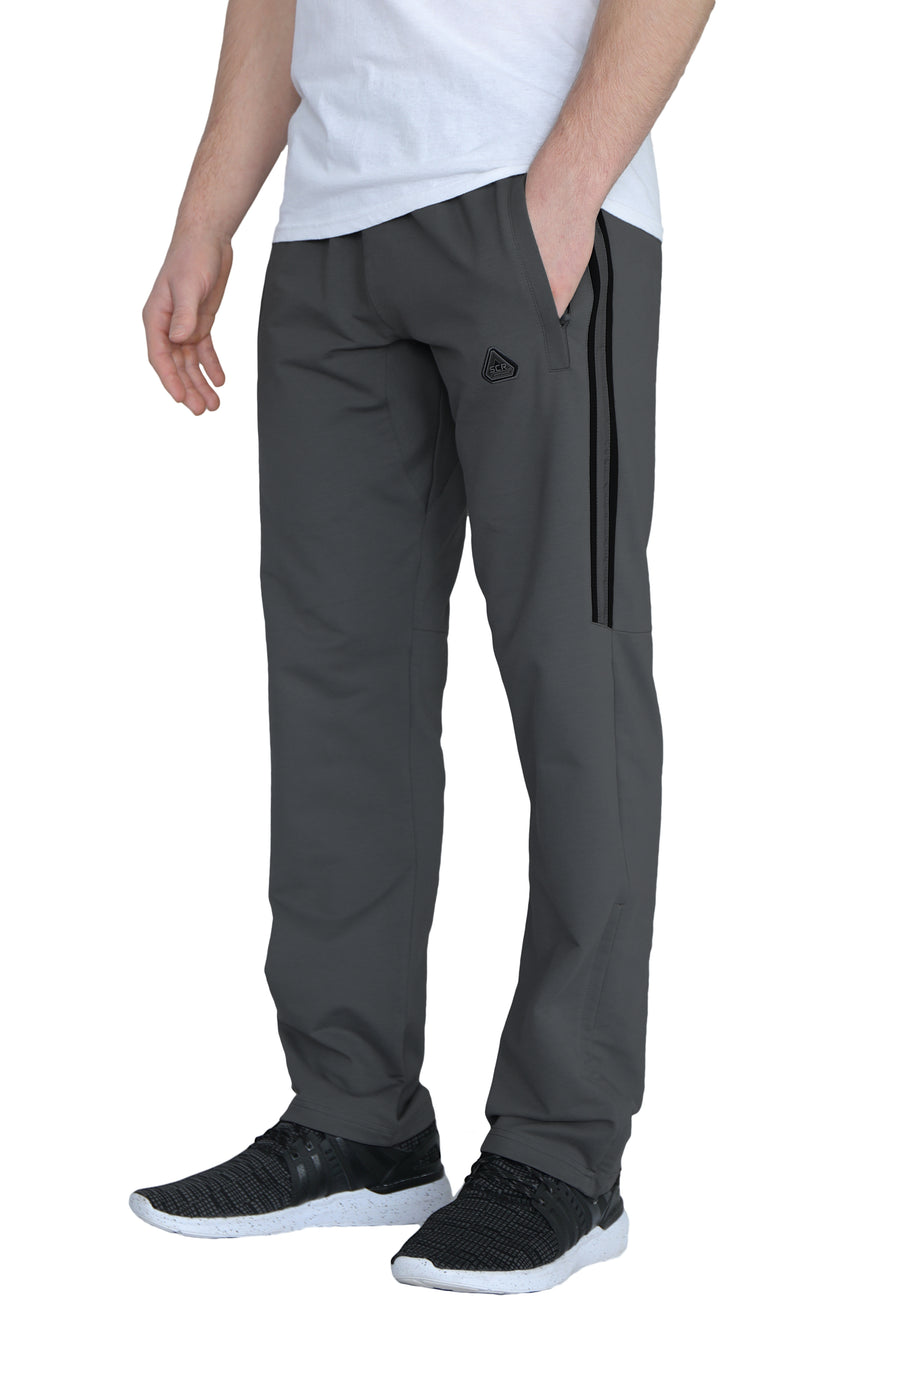 SCR SPORTSWEAR Men's Sweatpants with Pockets Tapered Slim Athletic